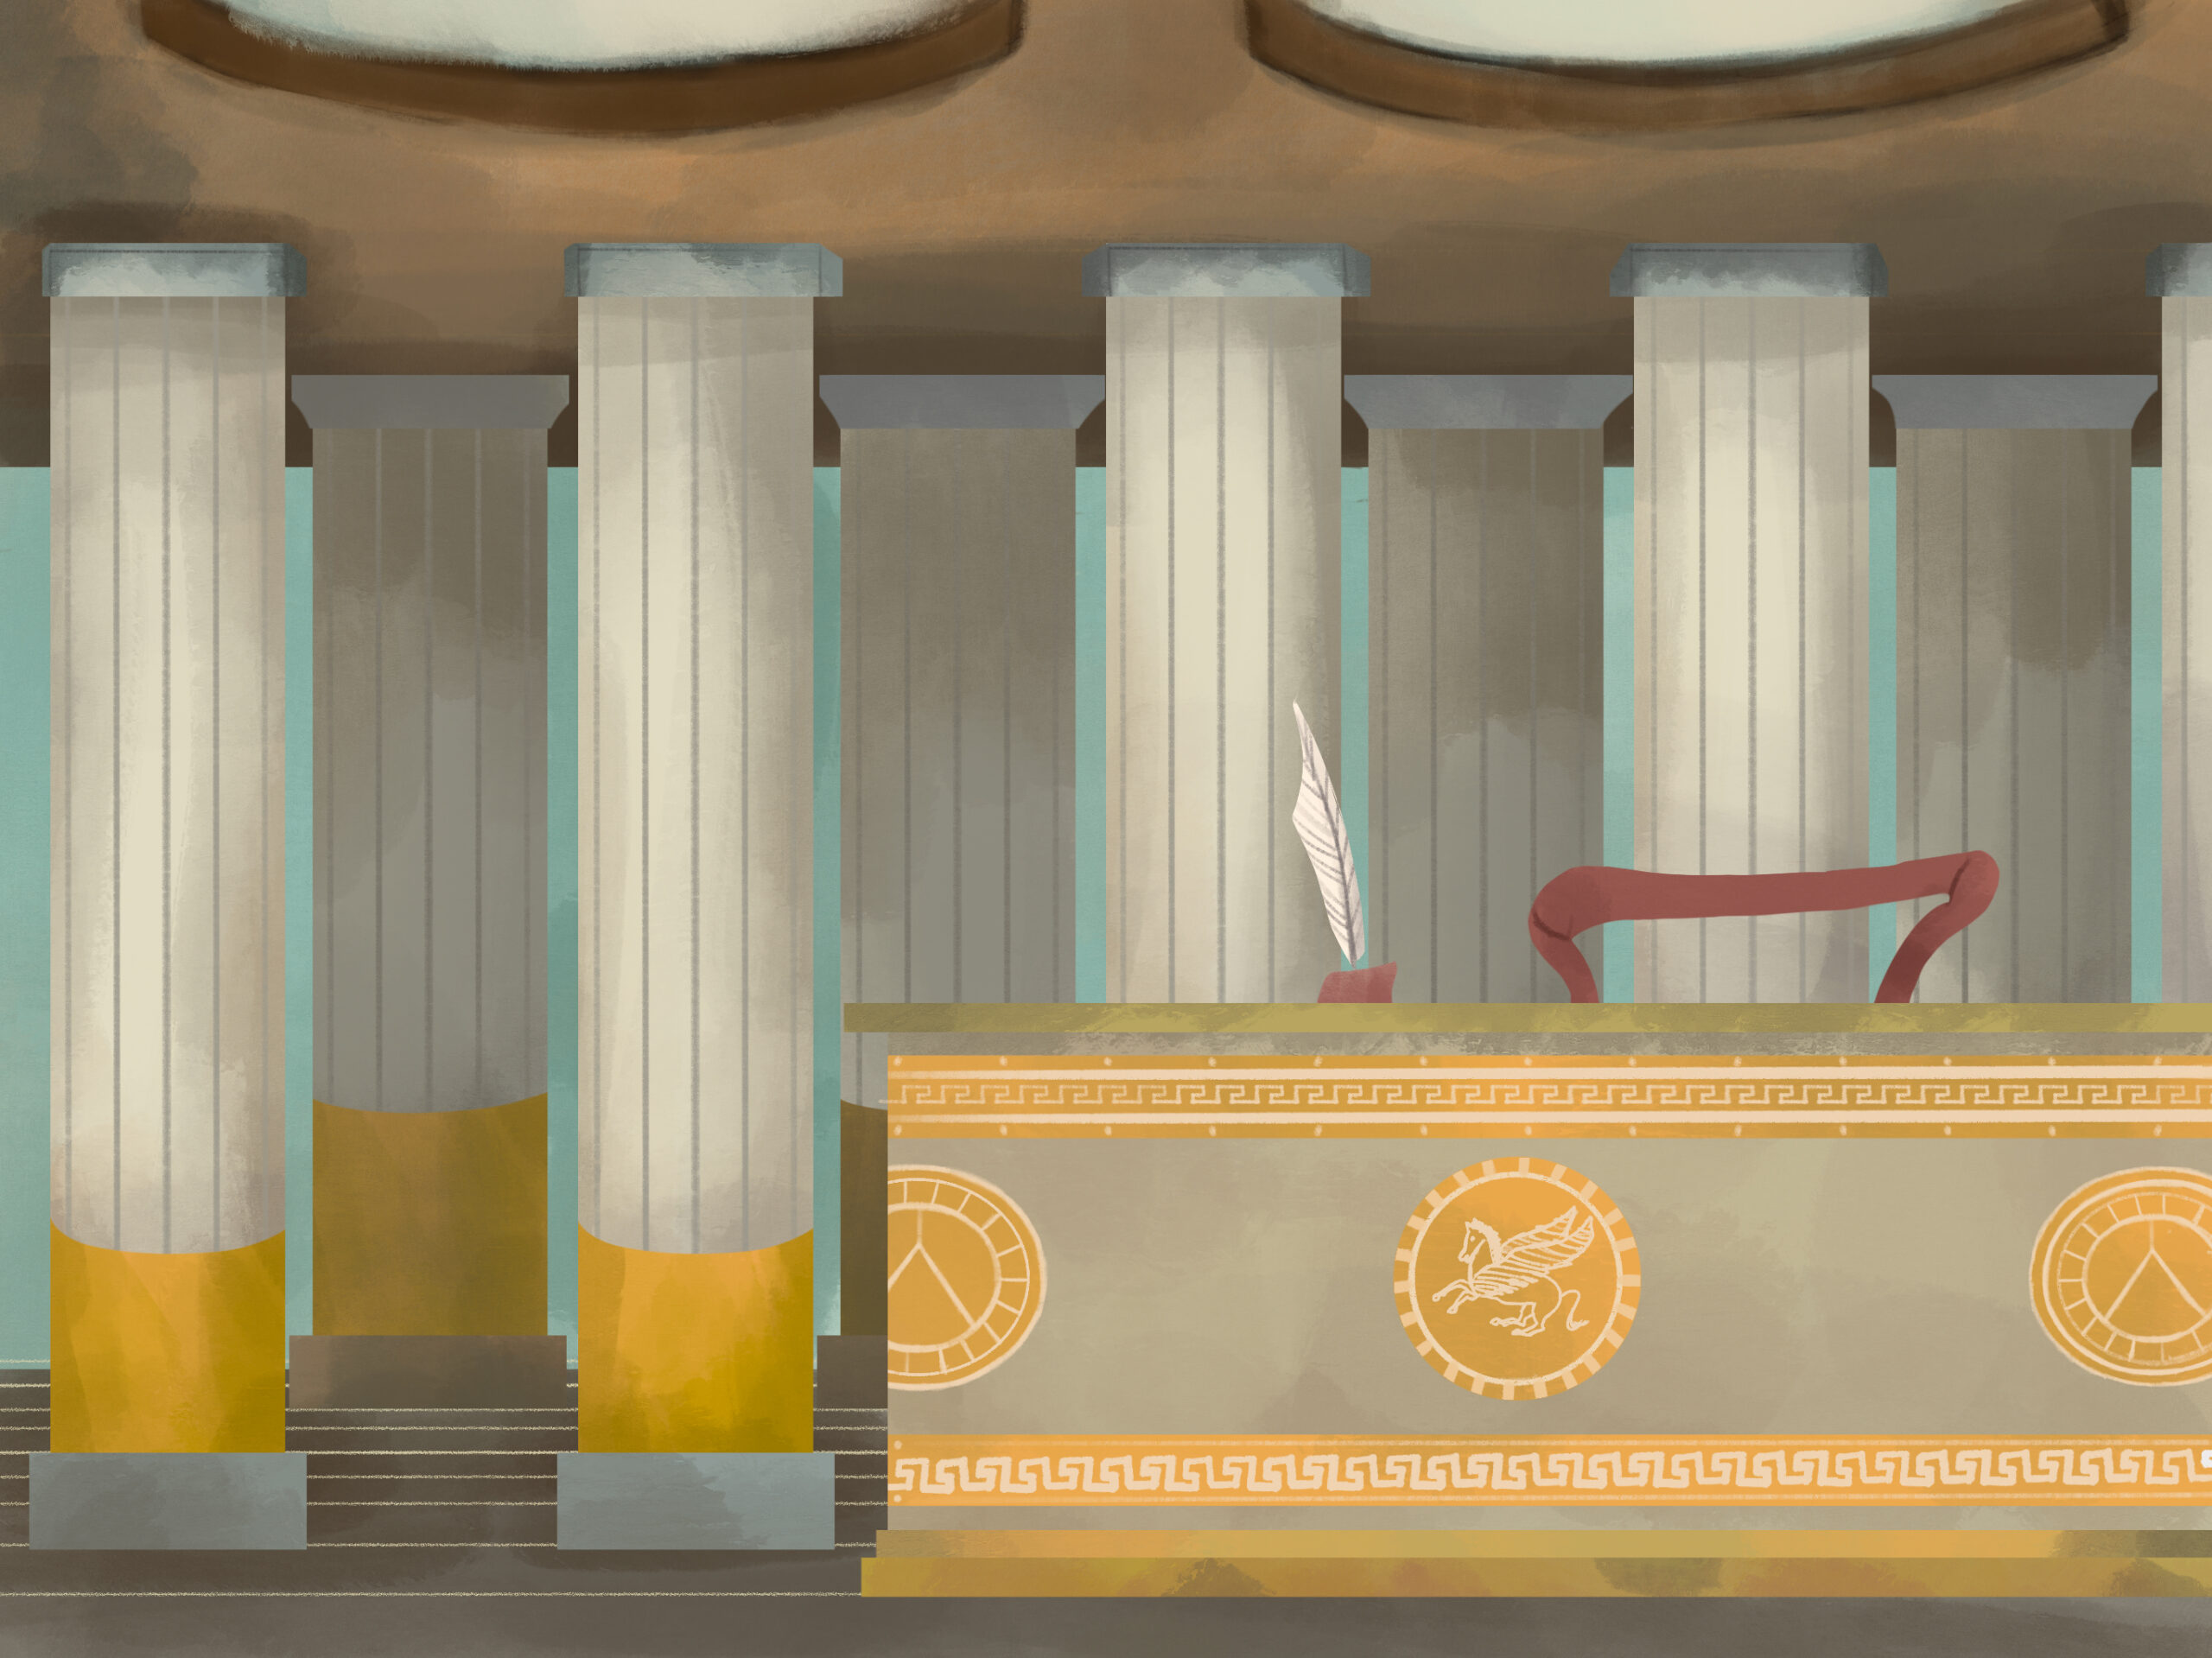 Inside the Pritaneo background. There are many pillars with gold trim, and a large marble desk emblazoned with a pegasus. The art style is lineless, with a natural palette.